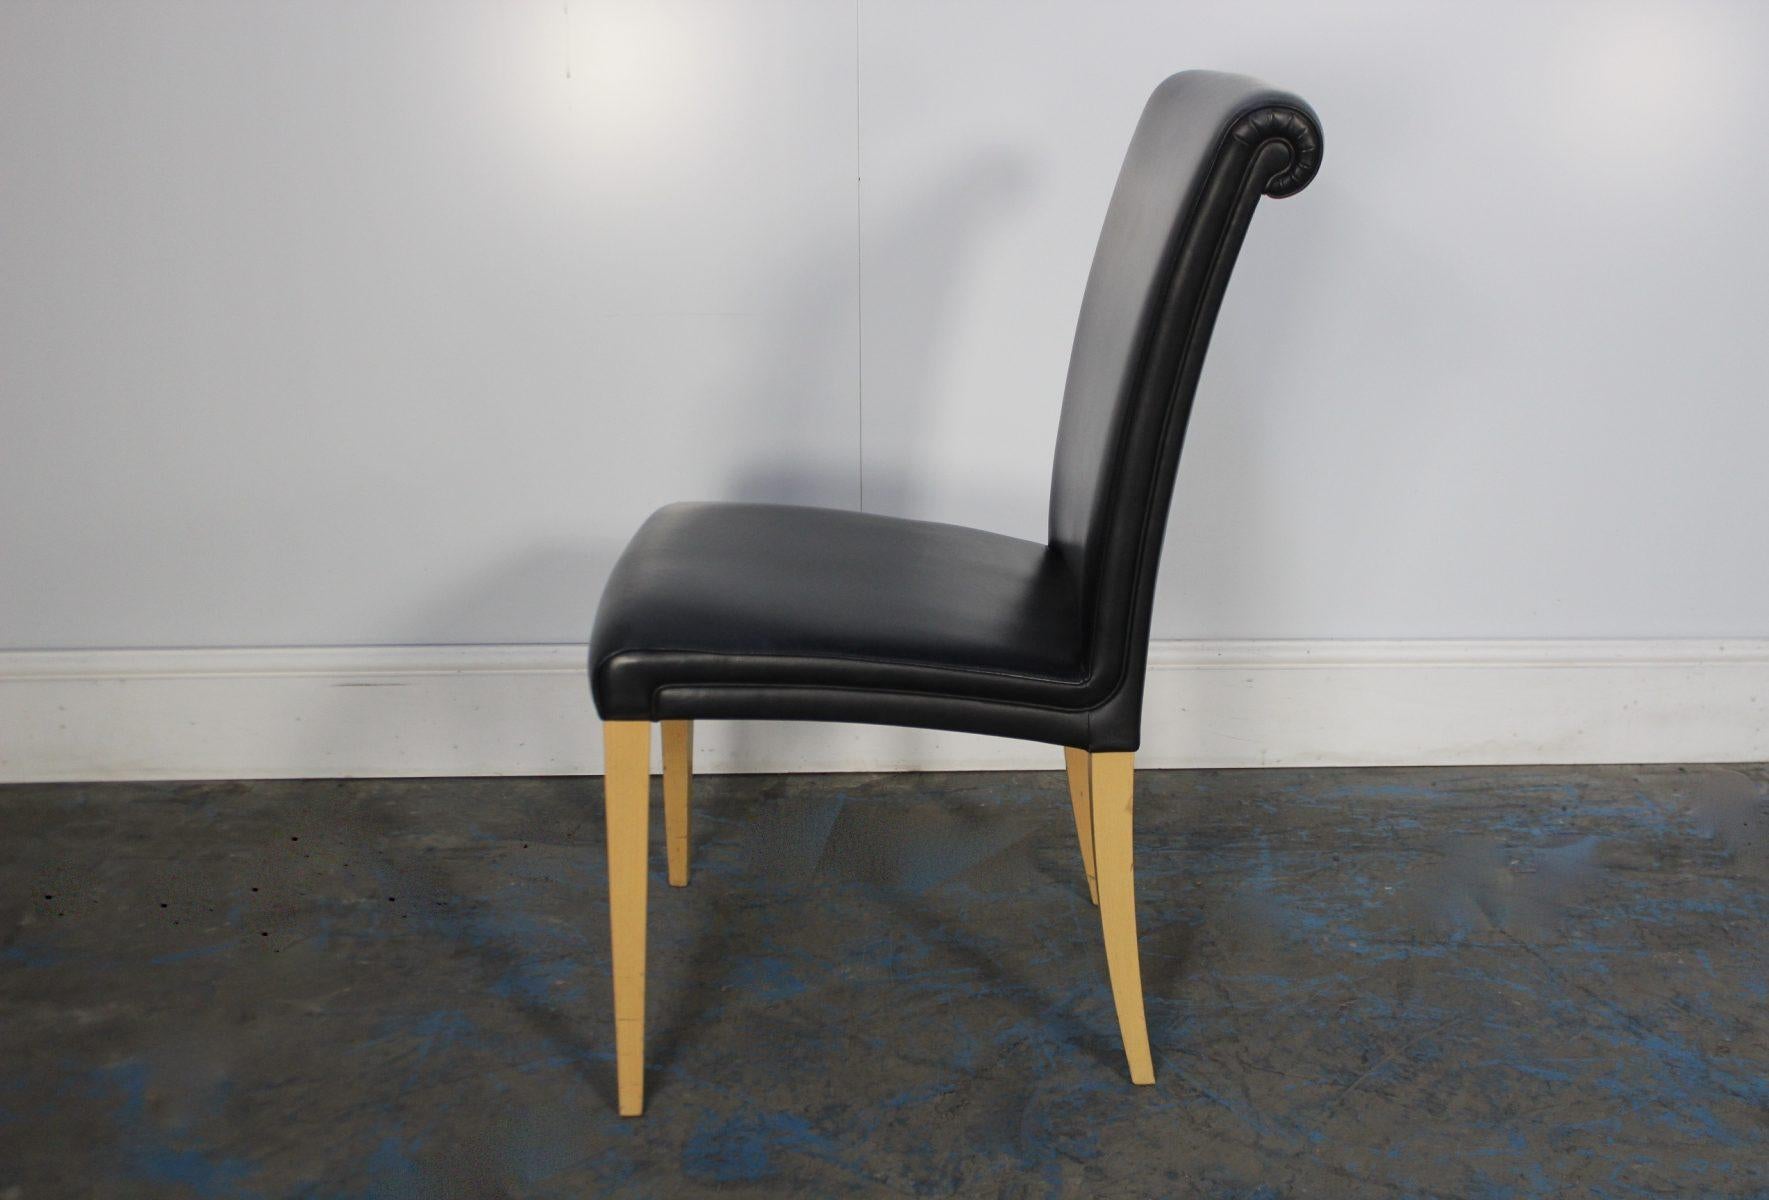 Leather Superb Suite of 12 Poltrona Frau “Vittoria” Dining Chairs in Black “Pelle Frau” For Sale